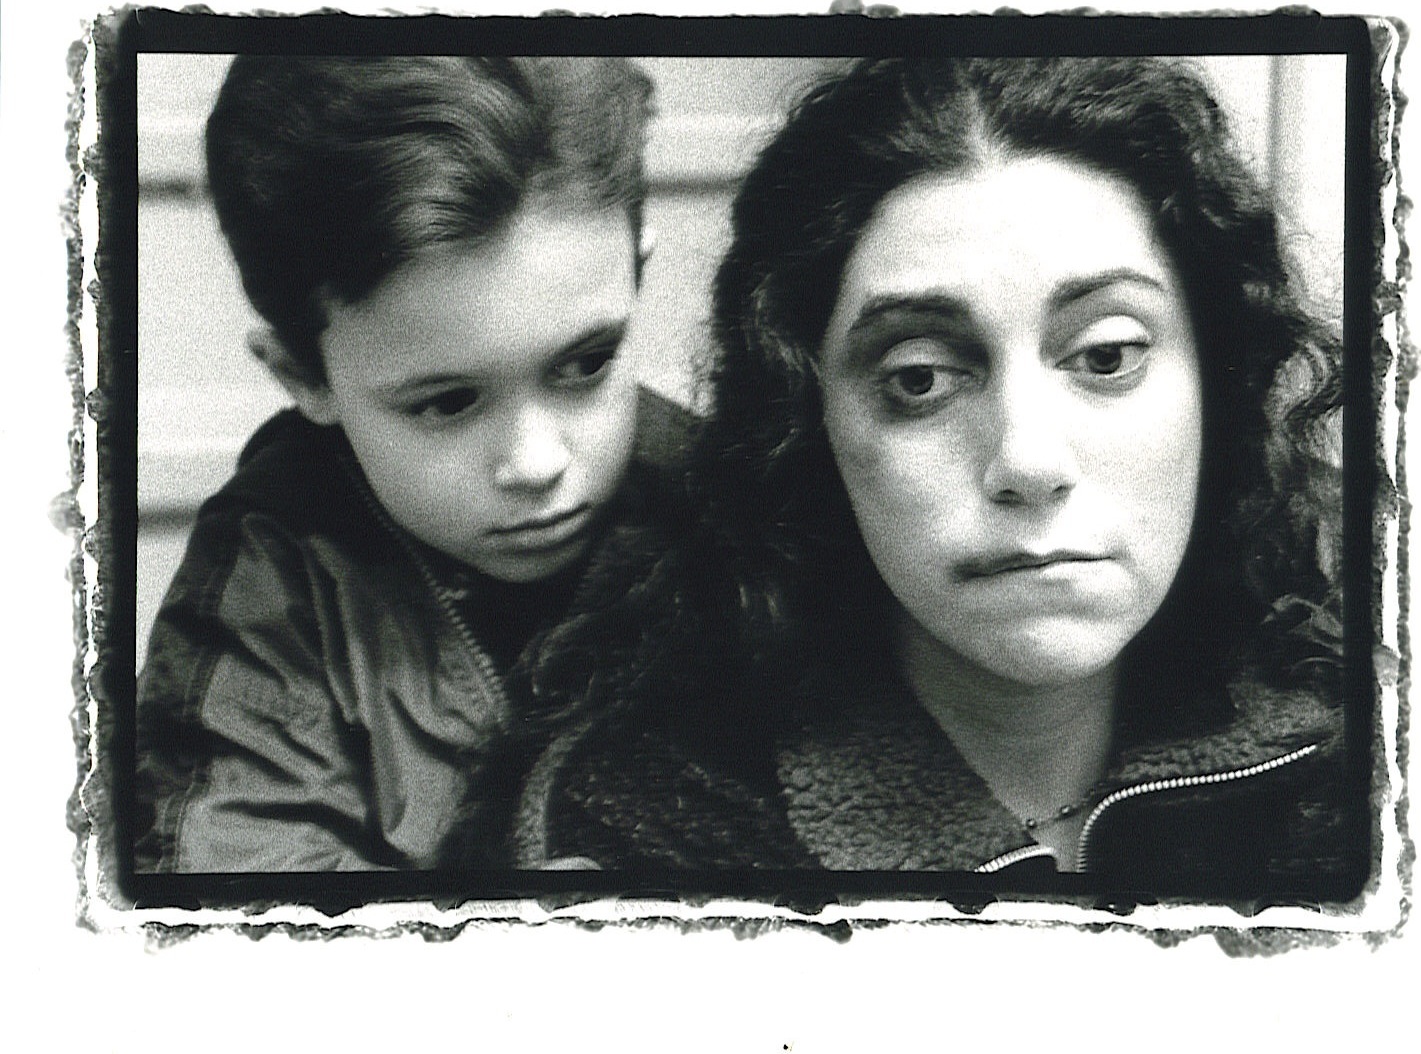 Toni D'Antonio and Jake Friedland as Mother & Son for promotional photo stills for the feature film NO ALTERNATIVE, written by Toni D'Antonio and produced by Shake The Tree Porductions